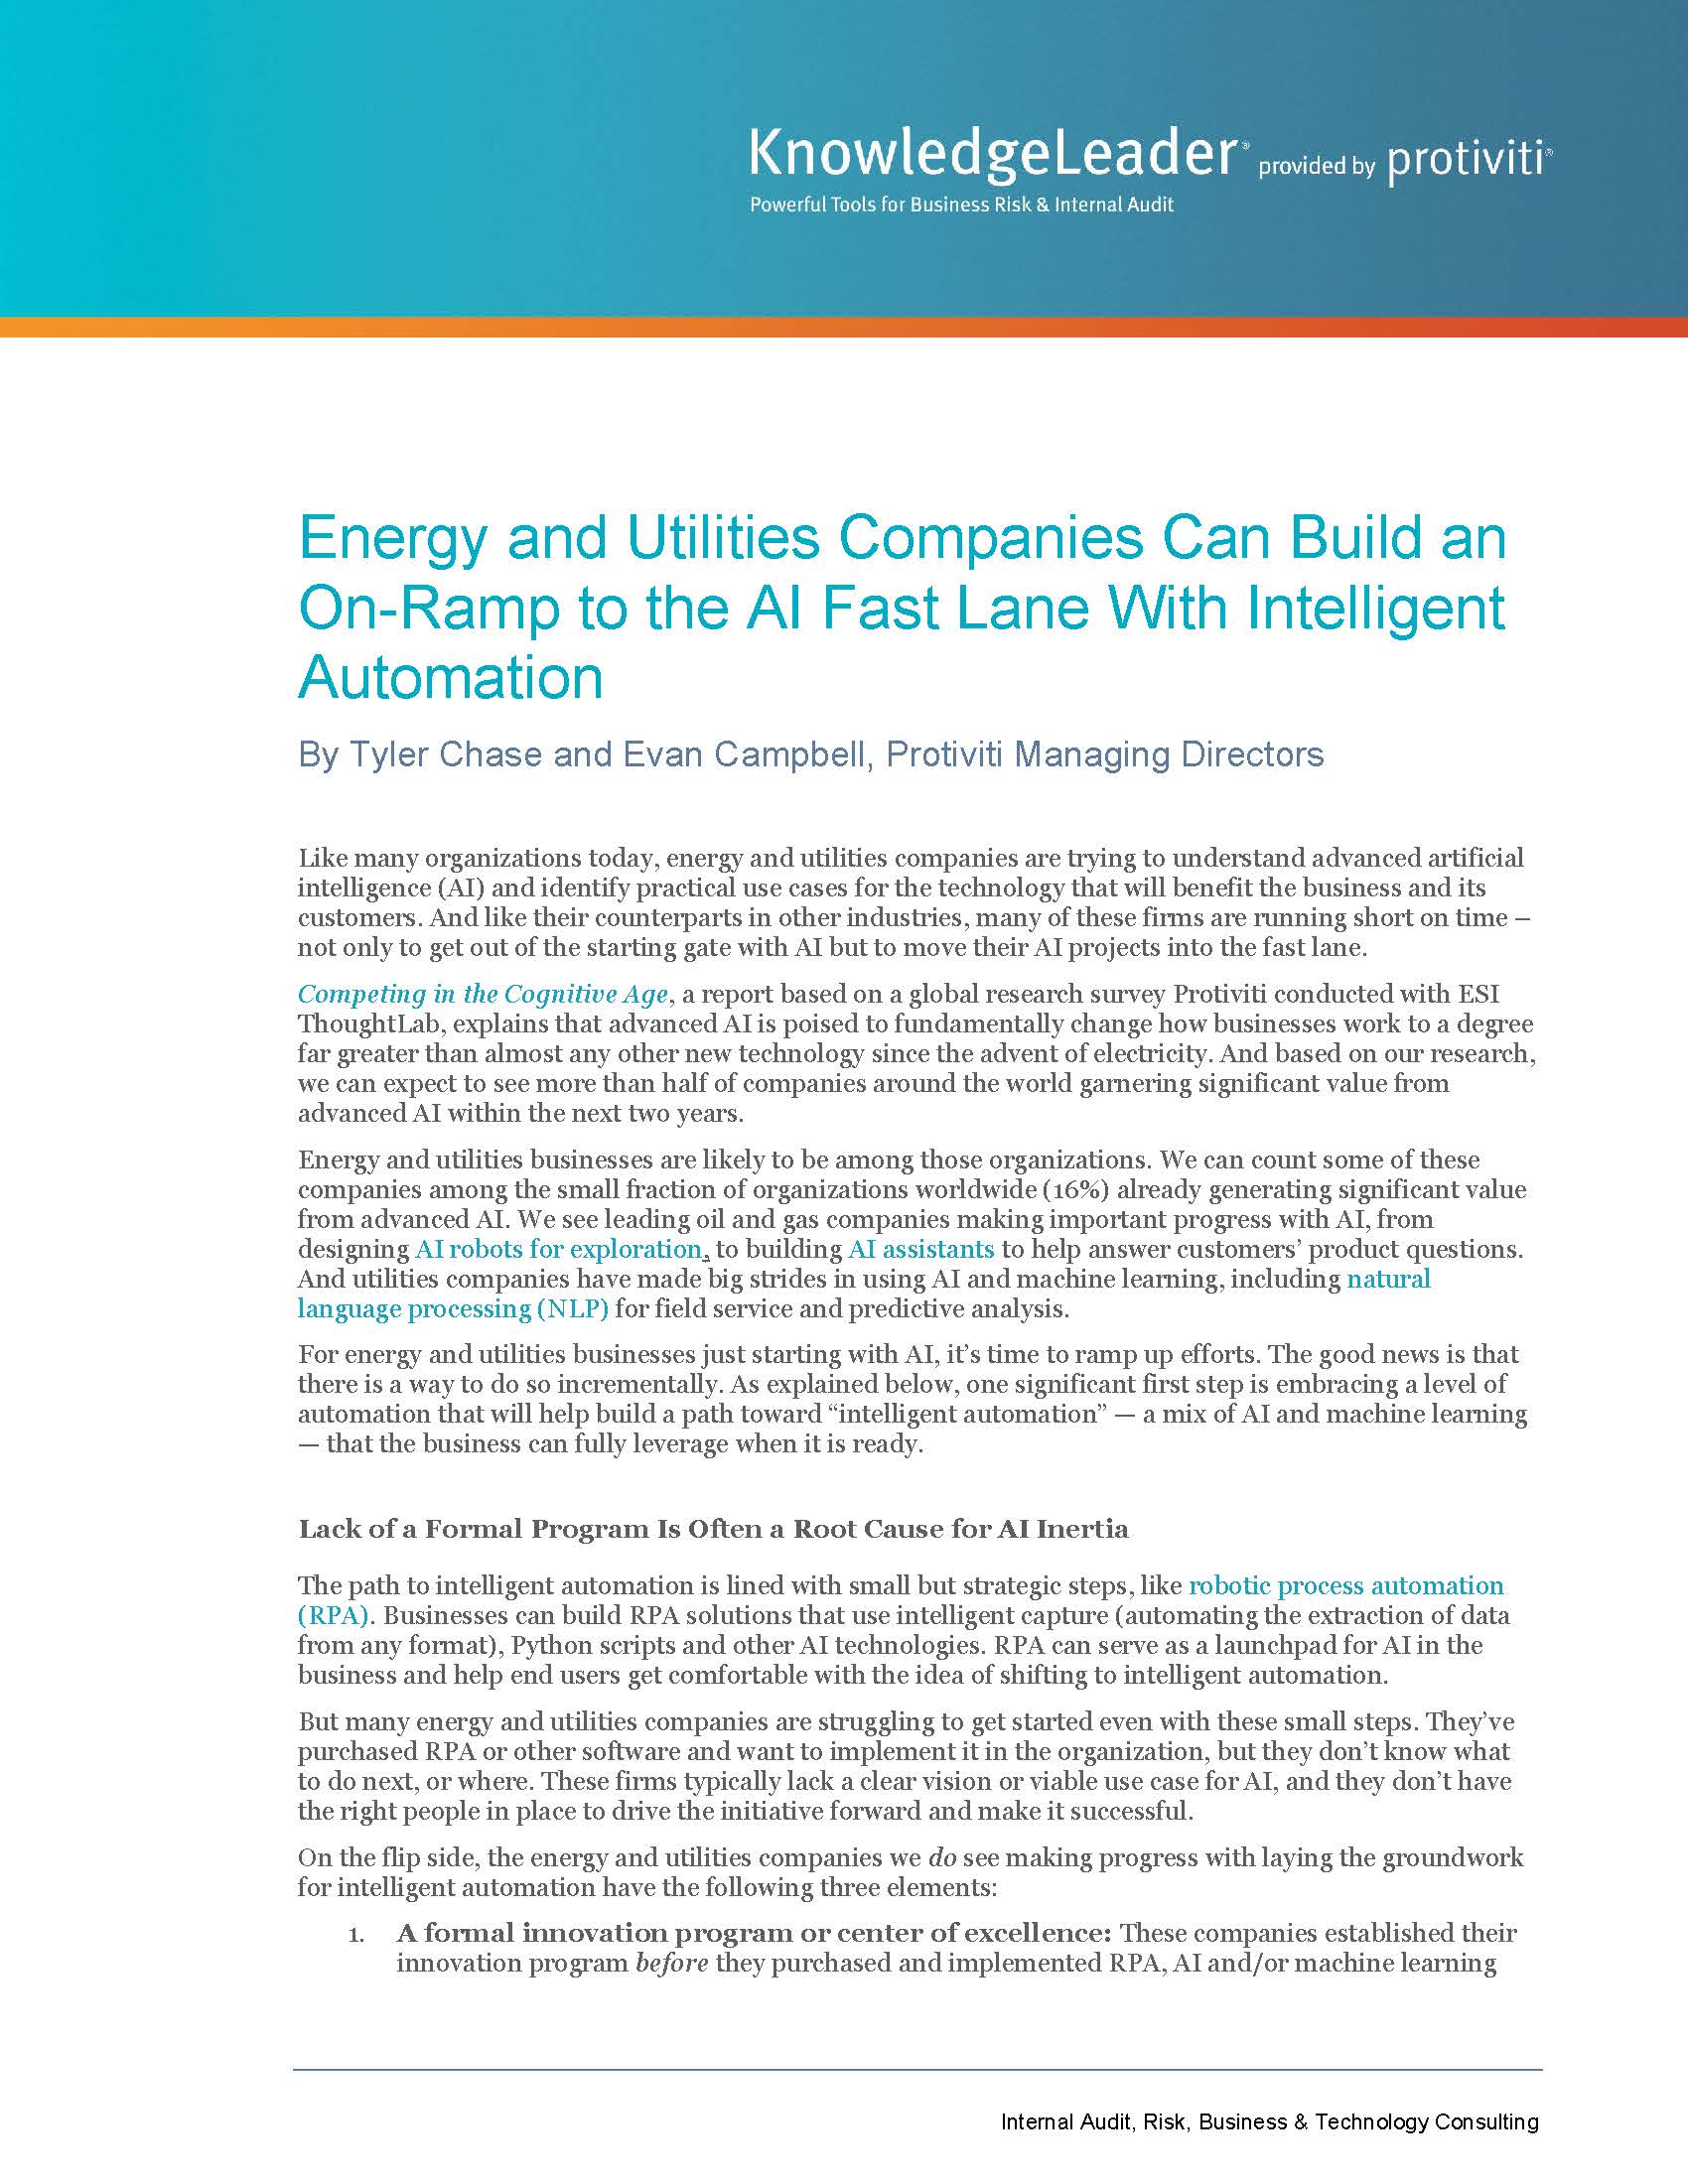 Screenshot of the first page of Energy and Utilities Companies Can Build an On-Ramp to the AI Fast Lane With Intelligent Automation